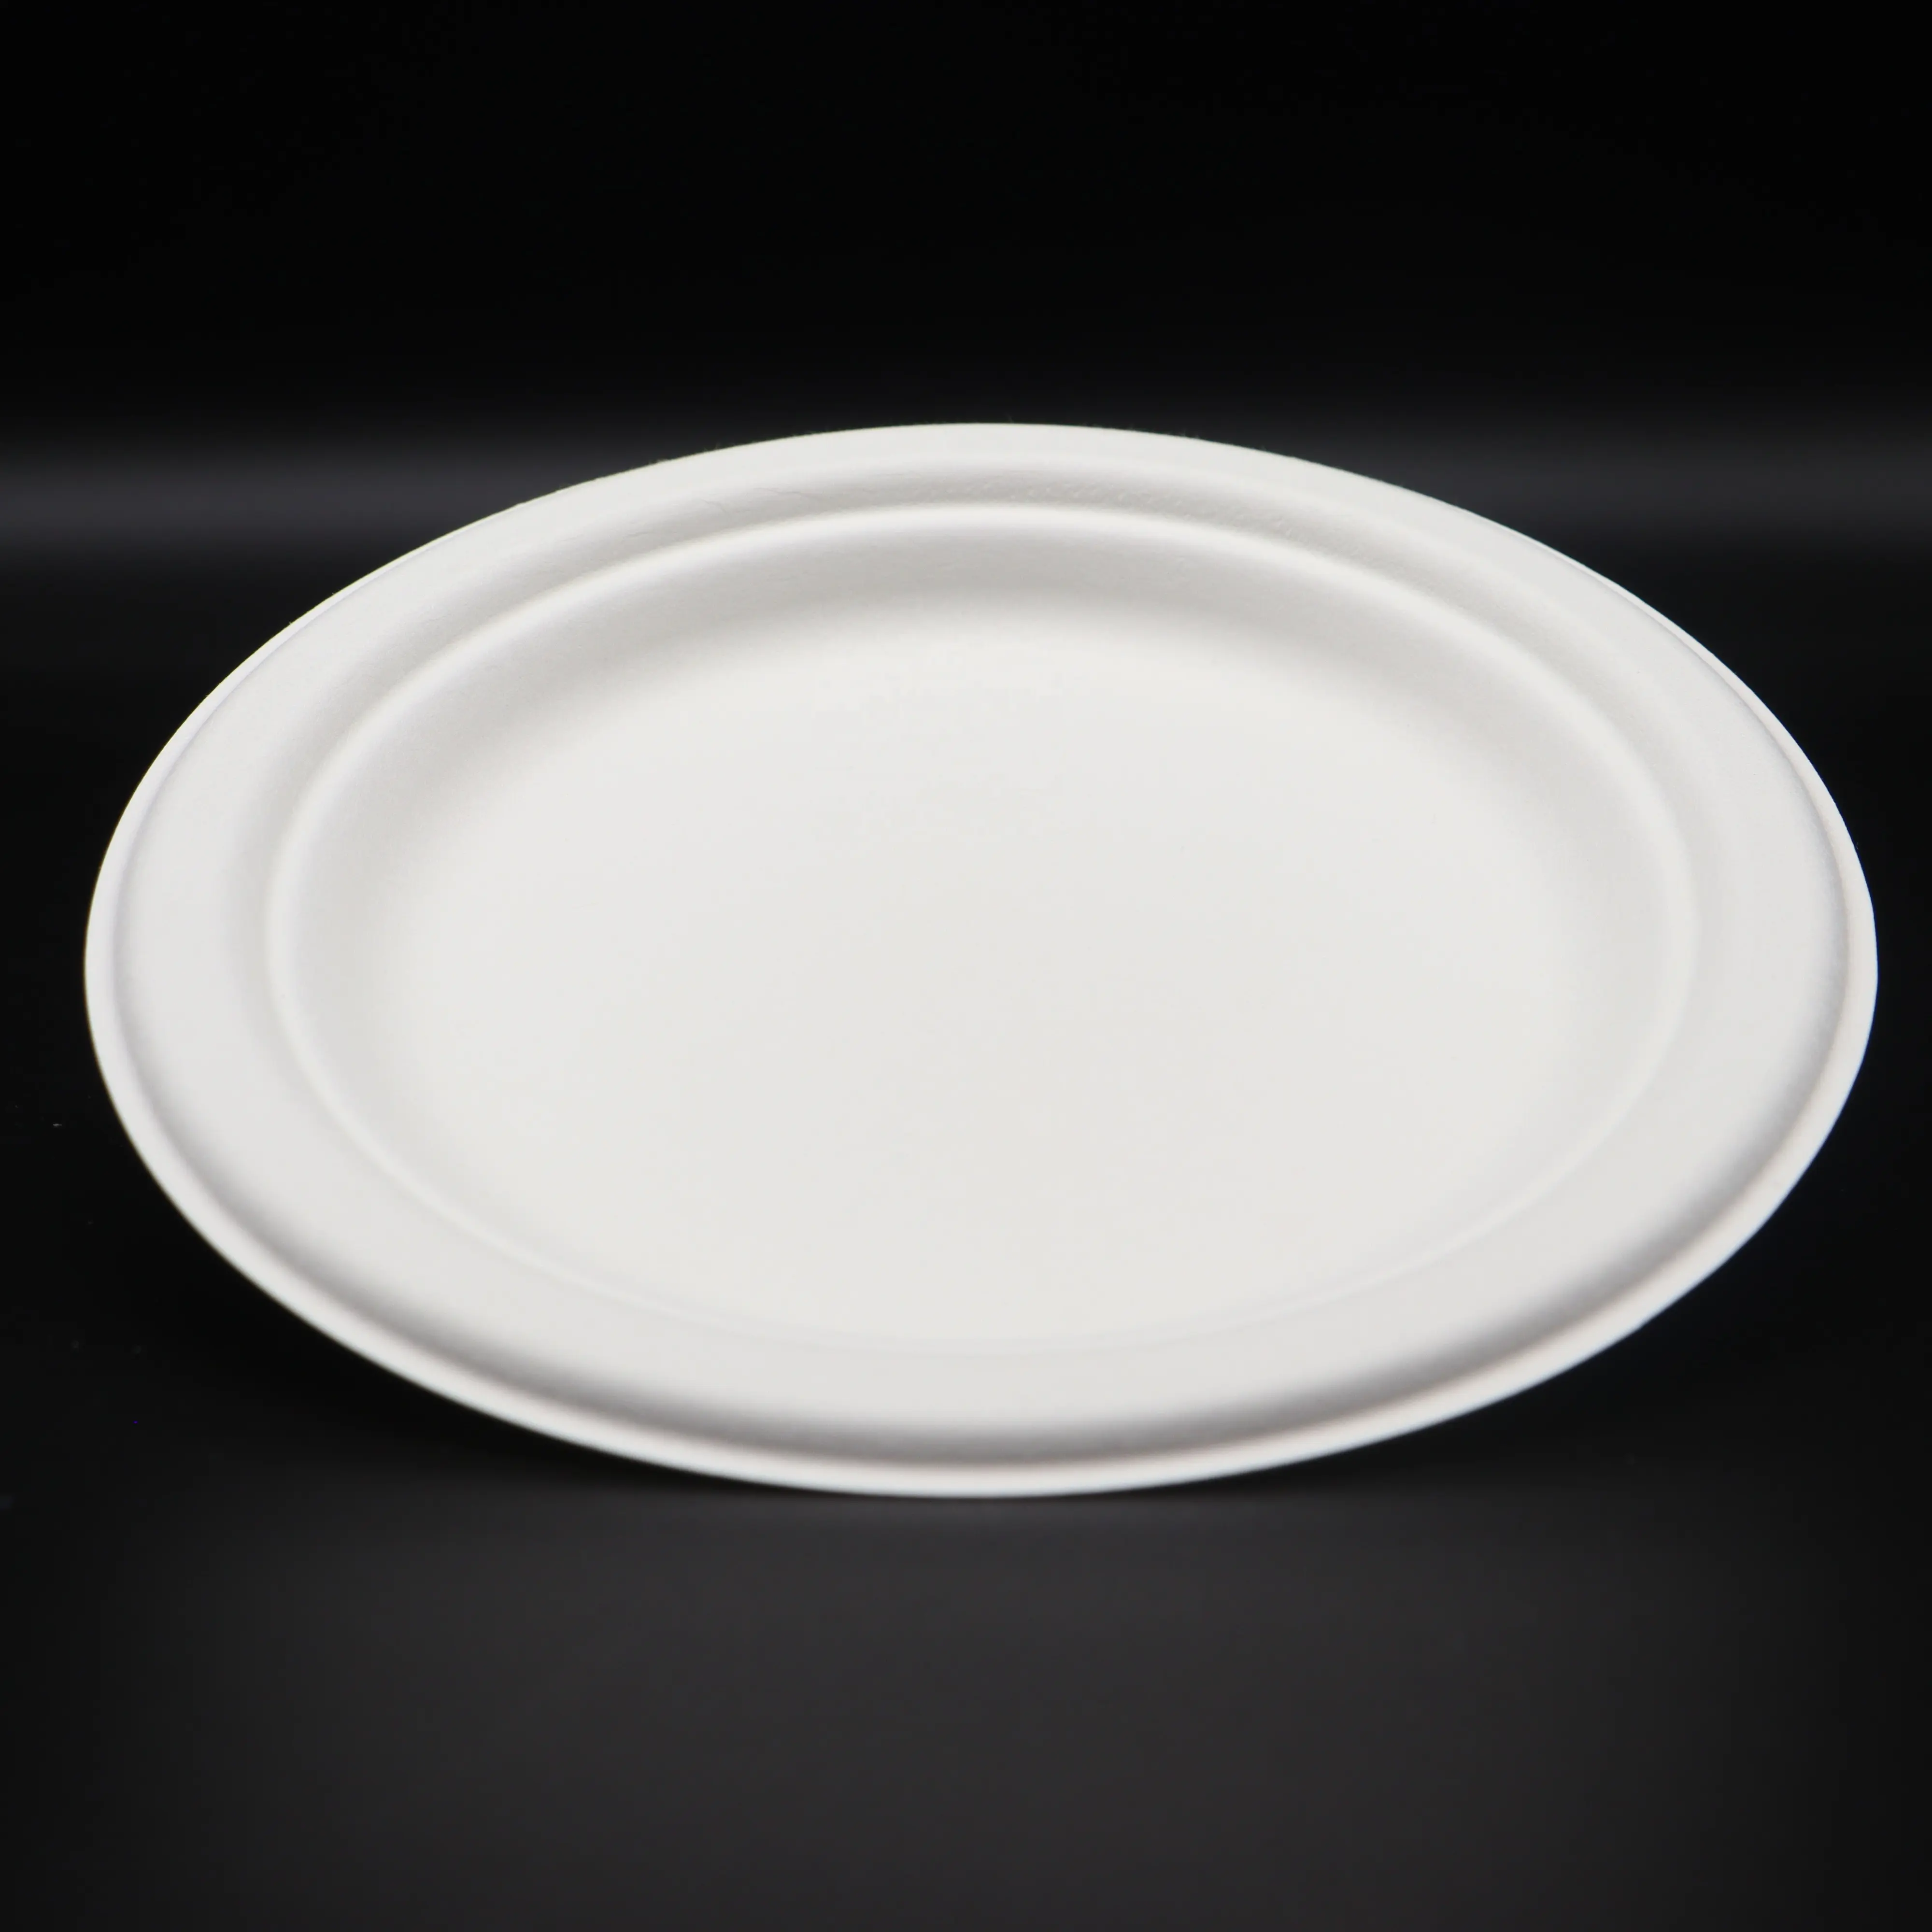 Hot sale Plate set biodegradable banquet Paper tableware3 Compartment Plate 9inch disposable tableware bagasse dinner plate